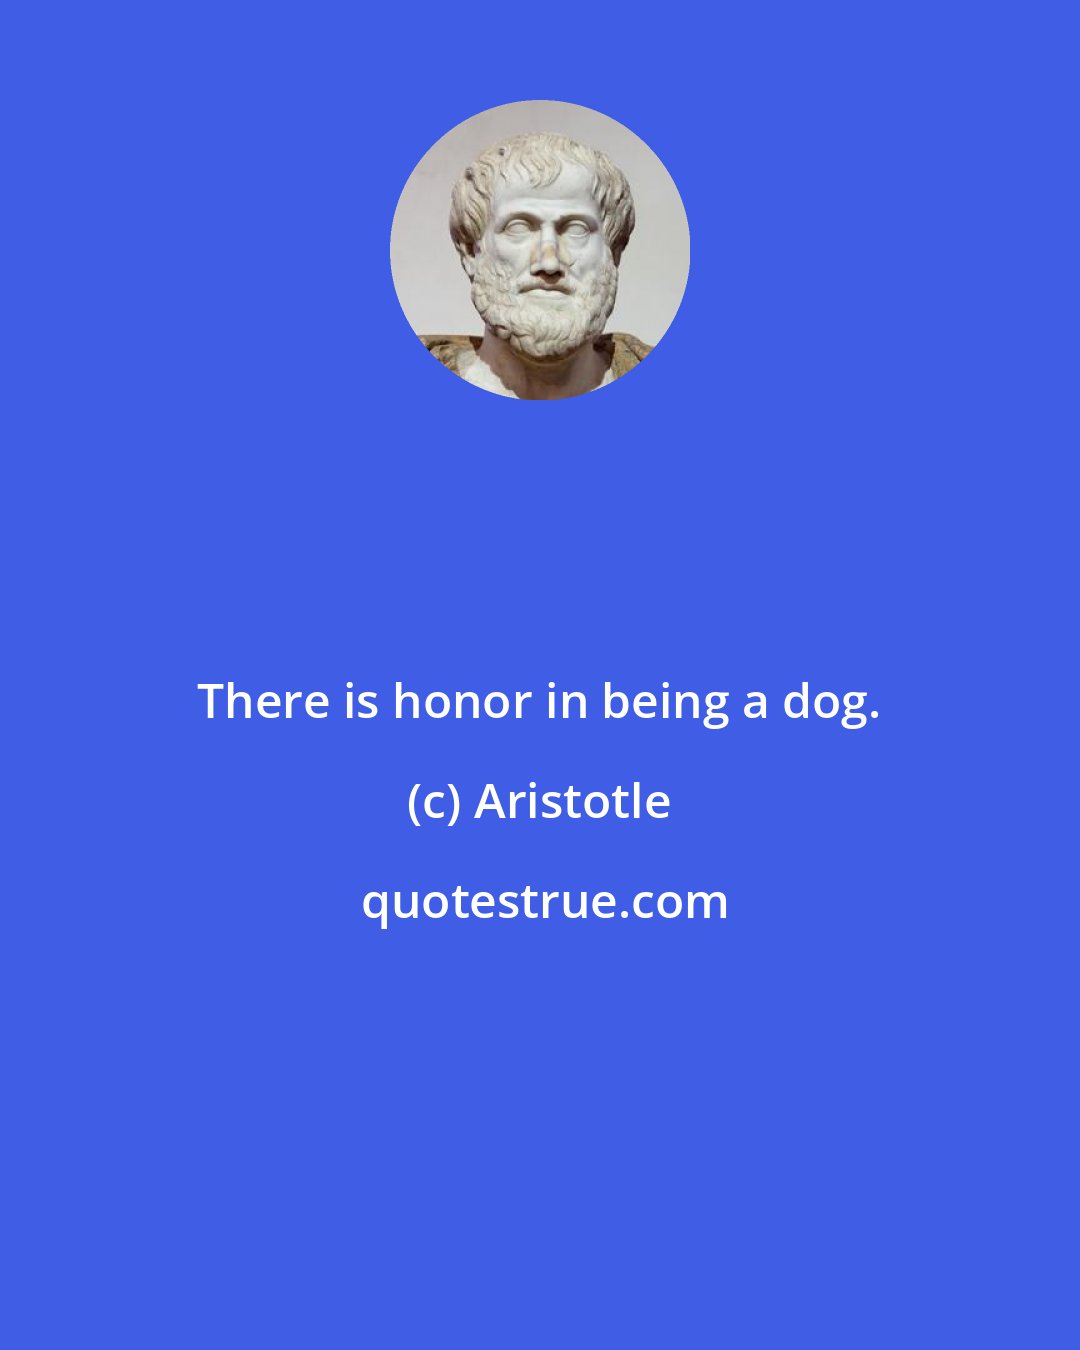 Aristotle: There is honor in being a dog.